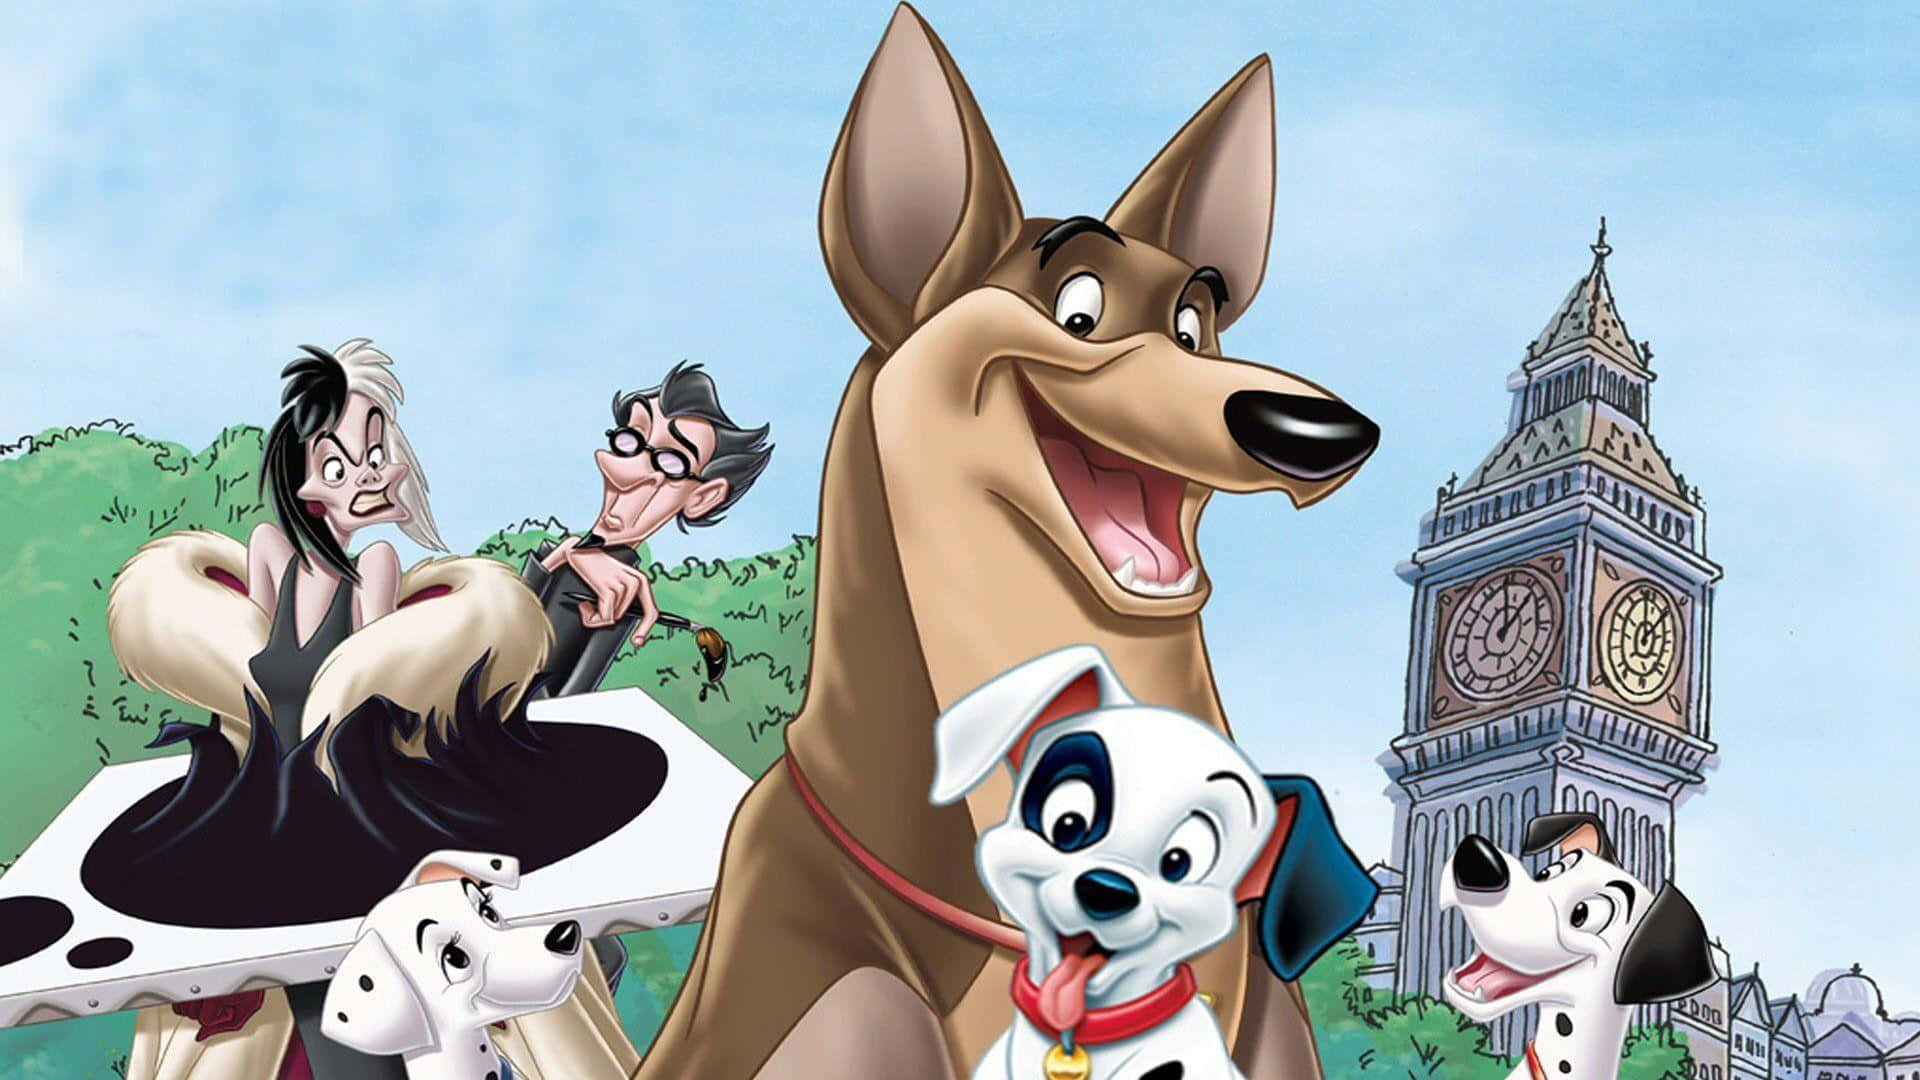 Image  "The perfect family, 101 Dalmatians"